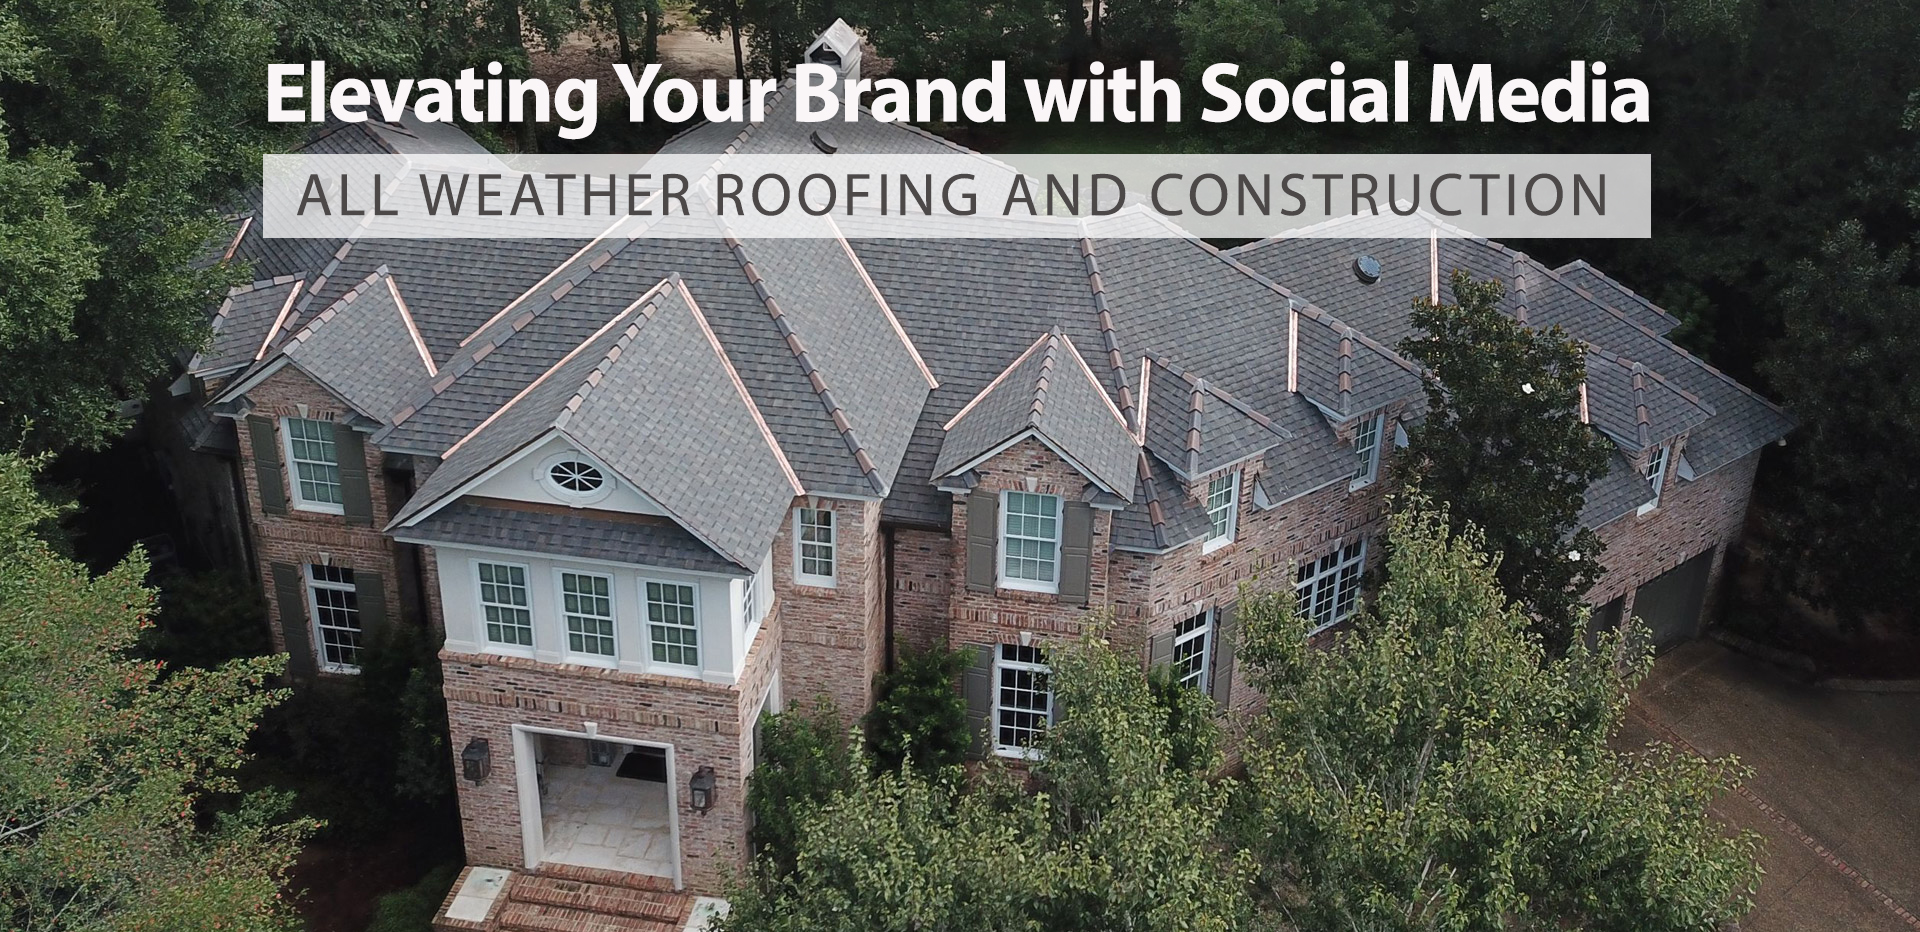 Title: Elevating Your Brand with Social Media  Subtitle: All Weather Roofing and Construction 